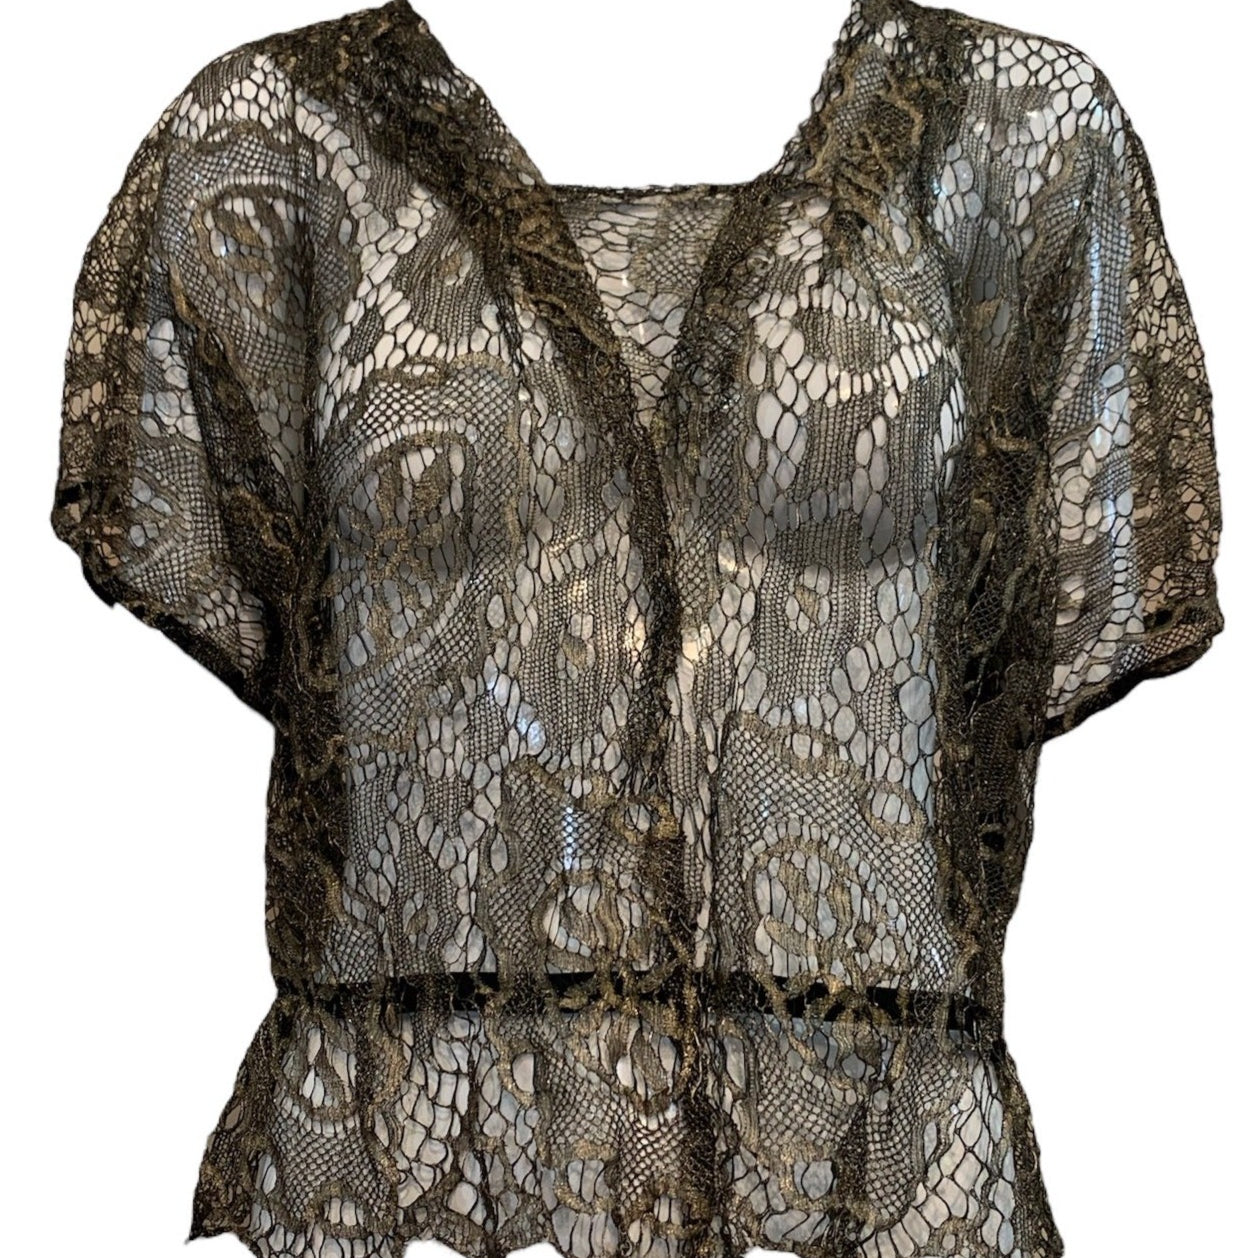  20s Gold Lame Lace Blouse FRONT 1 of 5